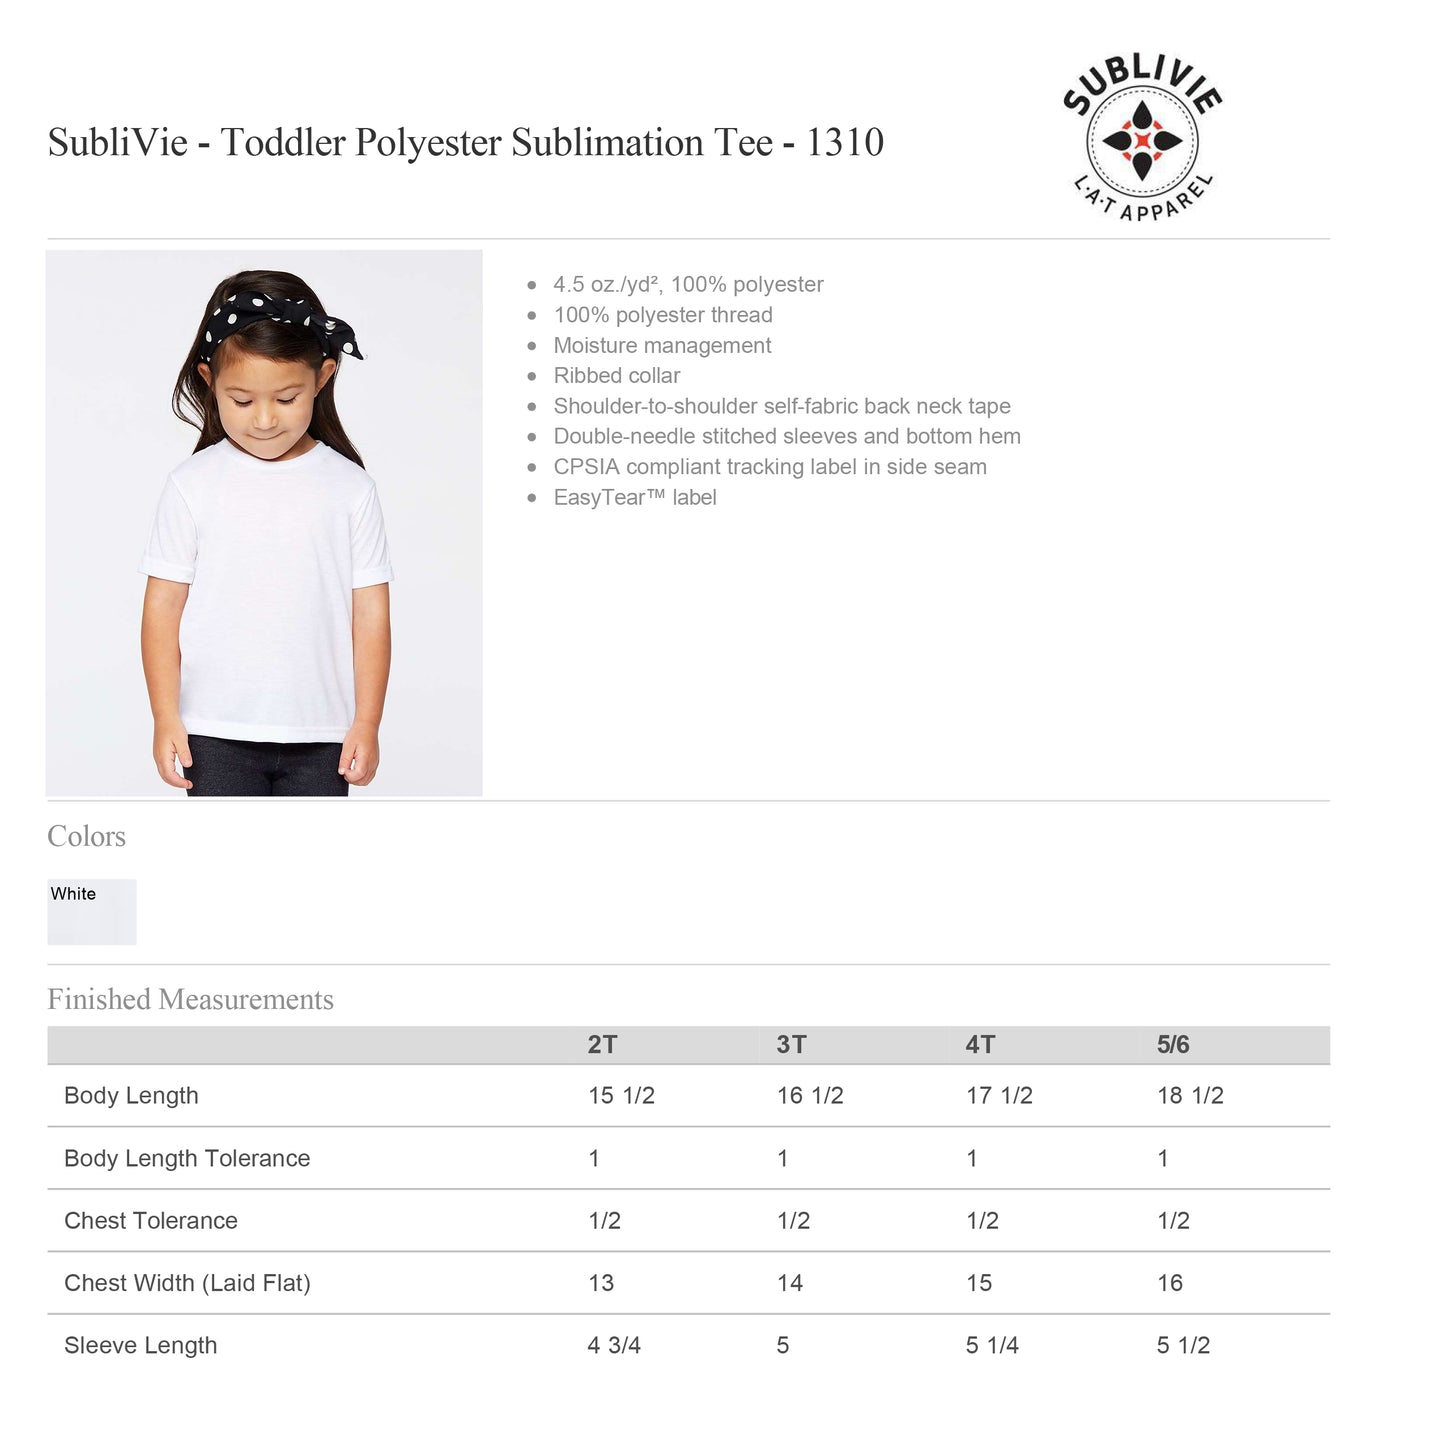 Sublivie - Toddler Polyester Sublimation Tee 1310 4T